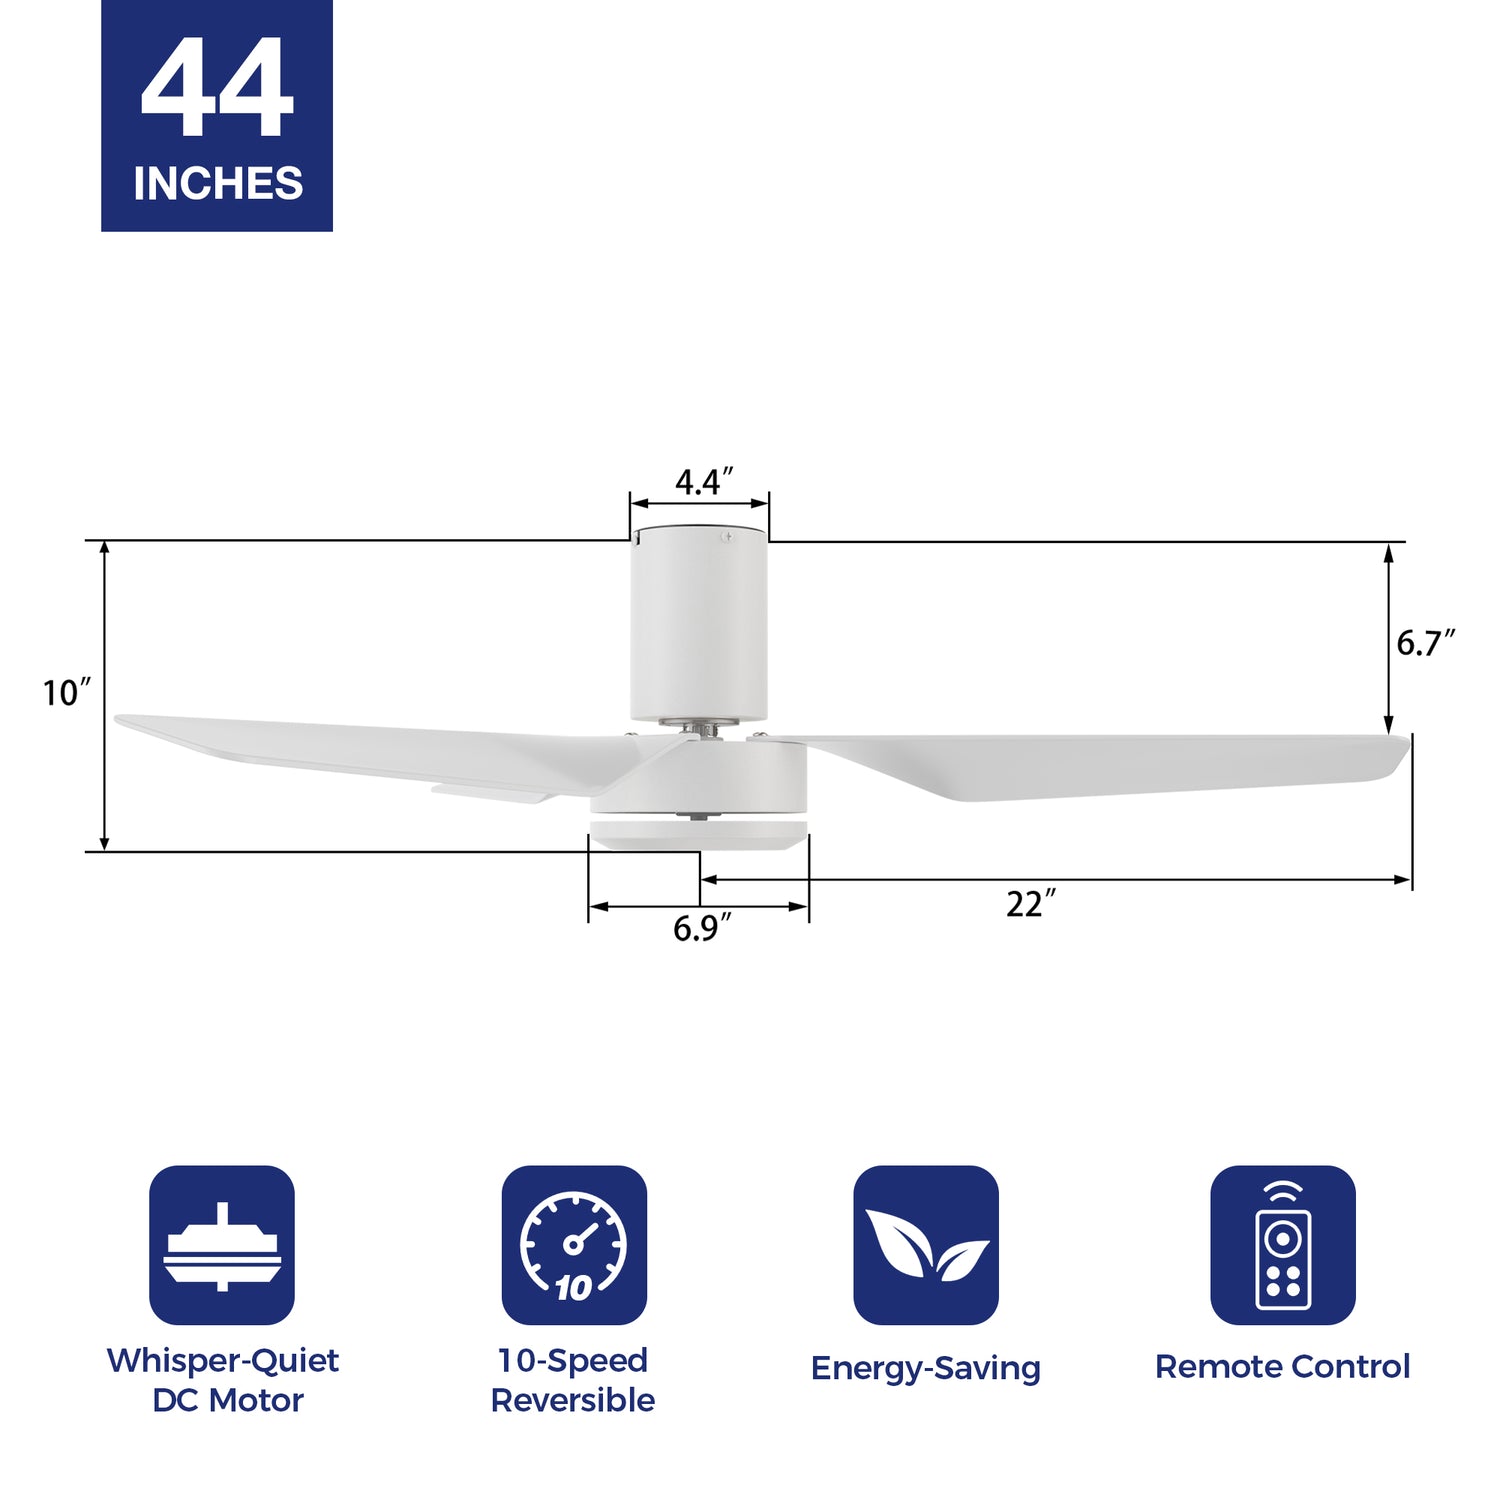 44in Ceiling Fan offers modern elegance for indoor spaces. Reversible DC motor, and large air volume for a cozy ambiance. 